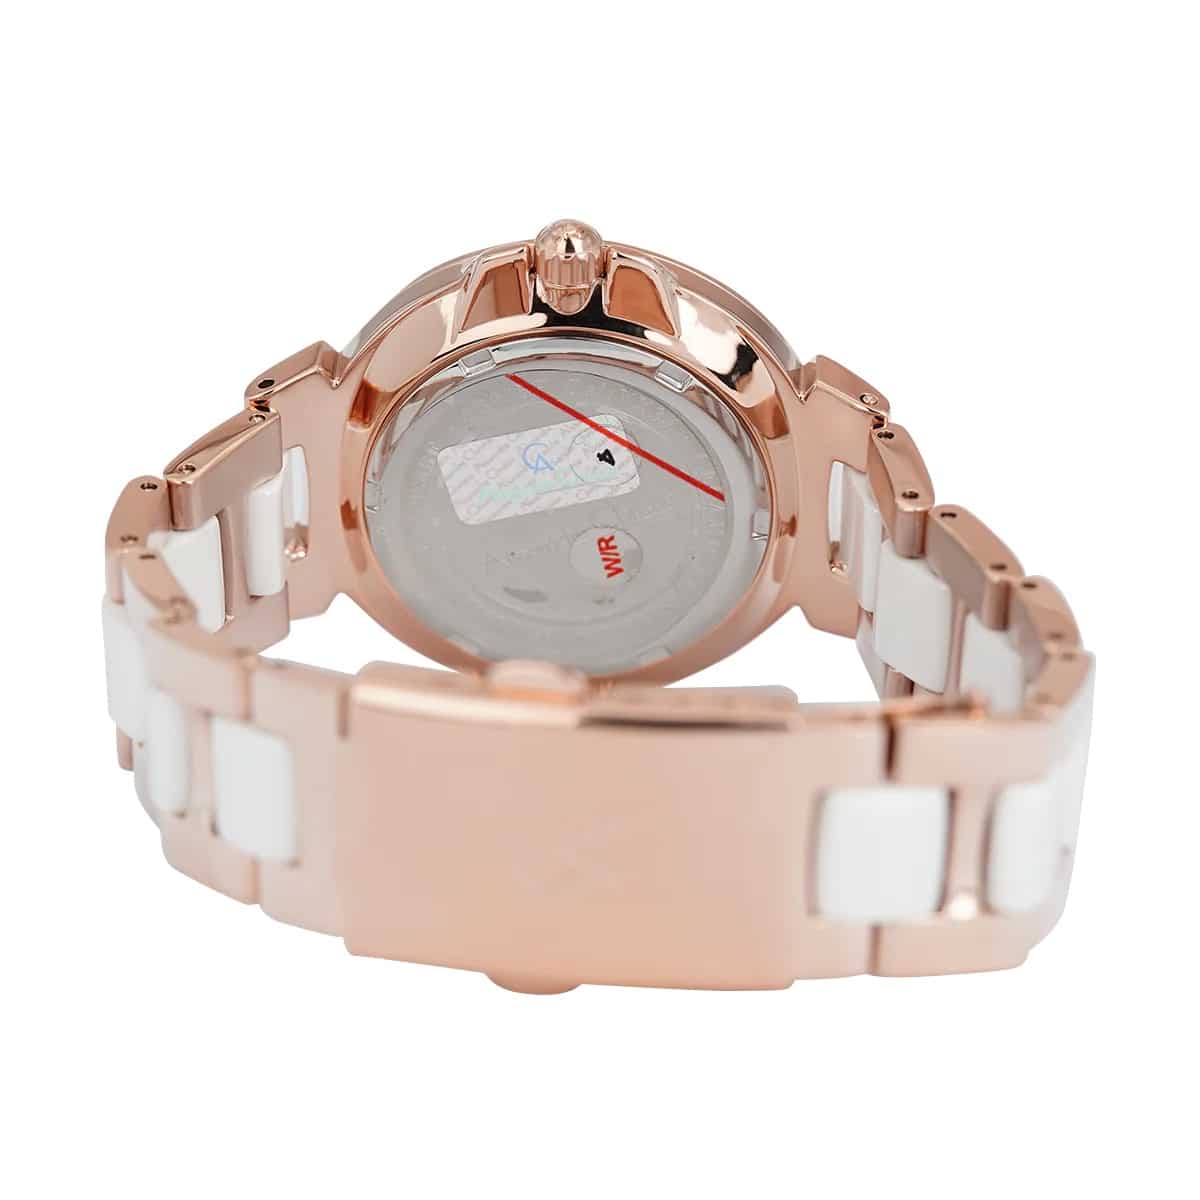 Alexandre Christie AC 2B02 BFB Ladies Multifunction Watch – Silver Rose Gold